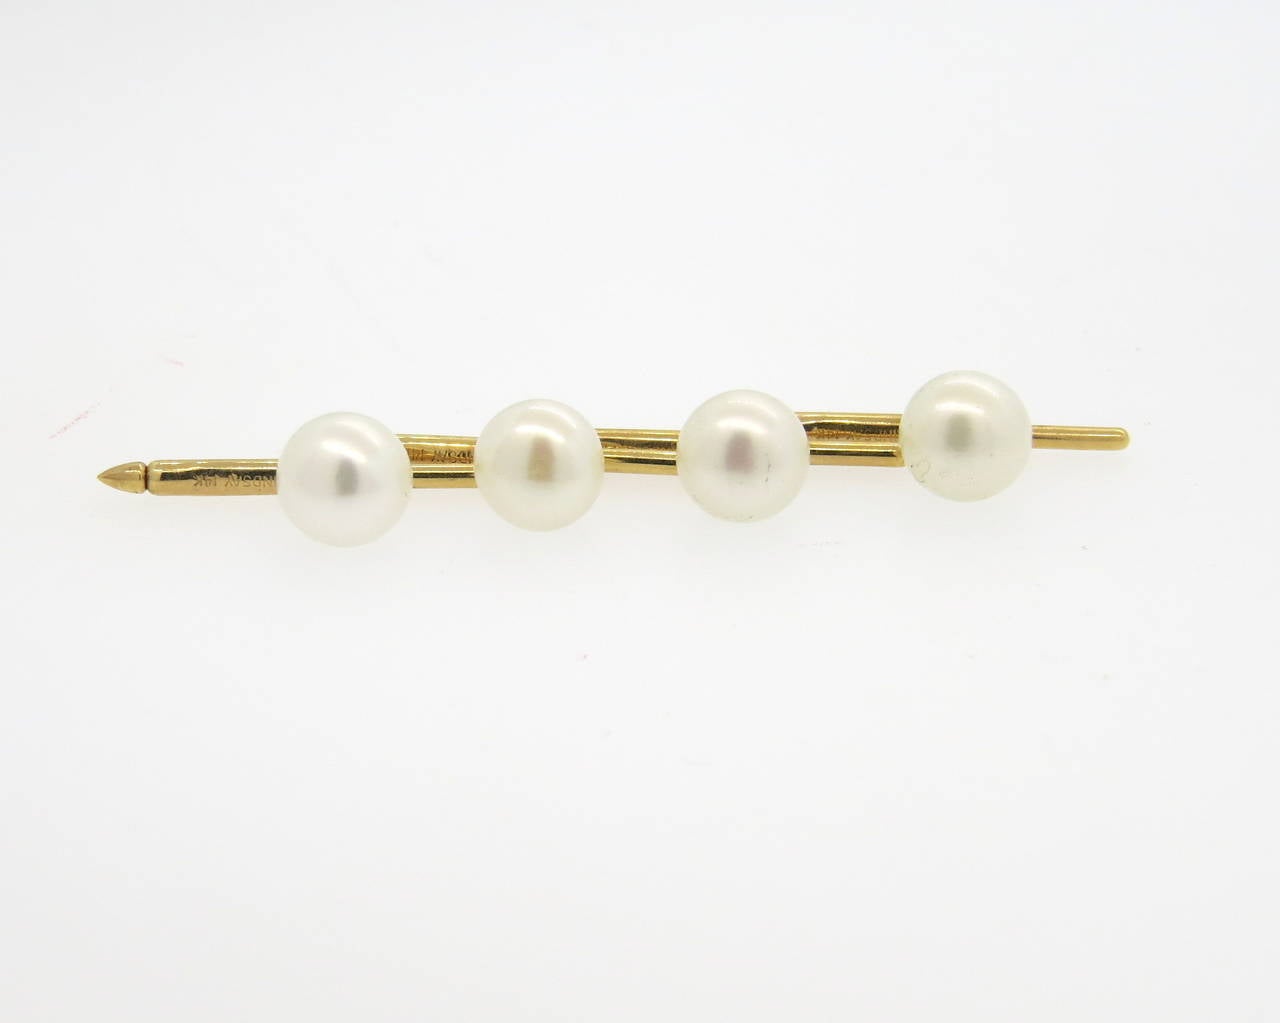 14k gold dress stud set of four, crafted by Lindsay & Co, featuring 8.3mm pearl top. Marked Lindsay and 14k. Weight of the set - 6.6 grams